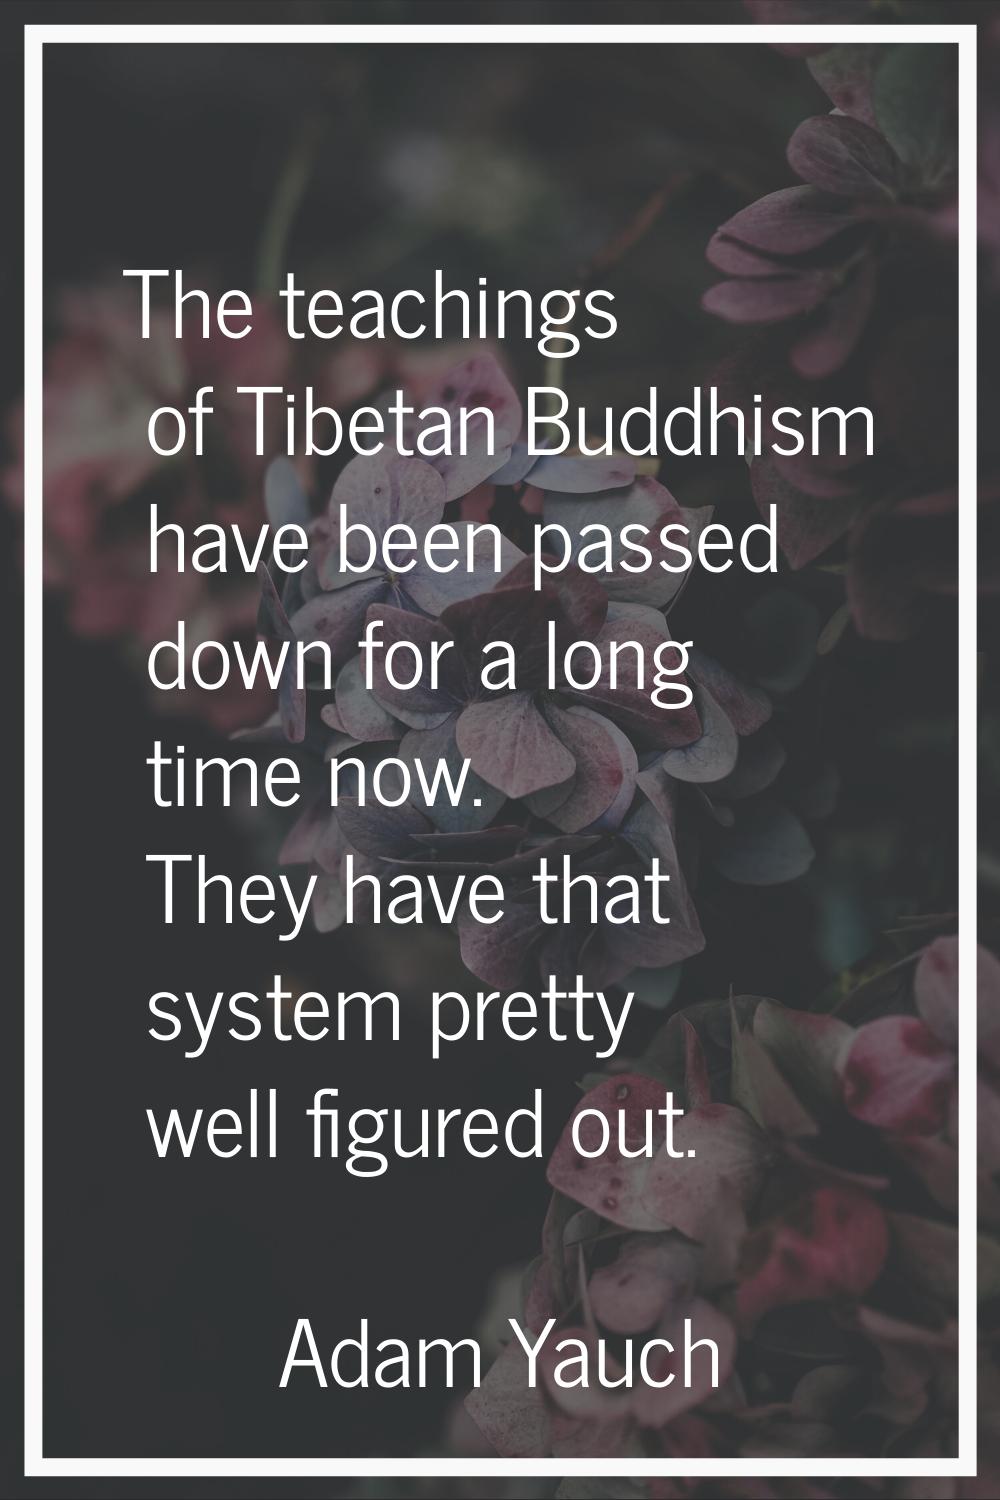 The teachings of Tibetan Buddhism have been passed down for a long time now. They have that system 